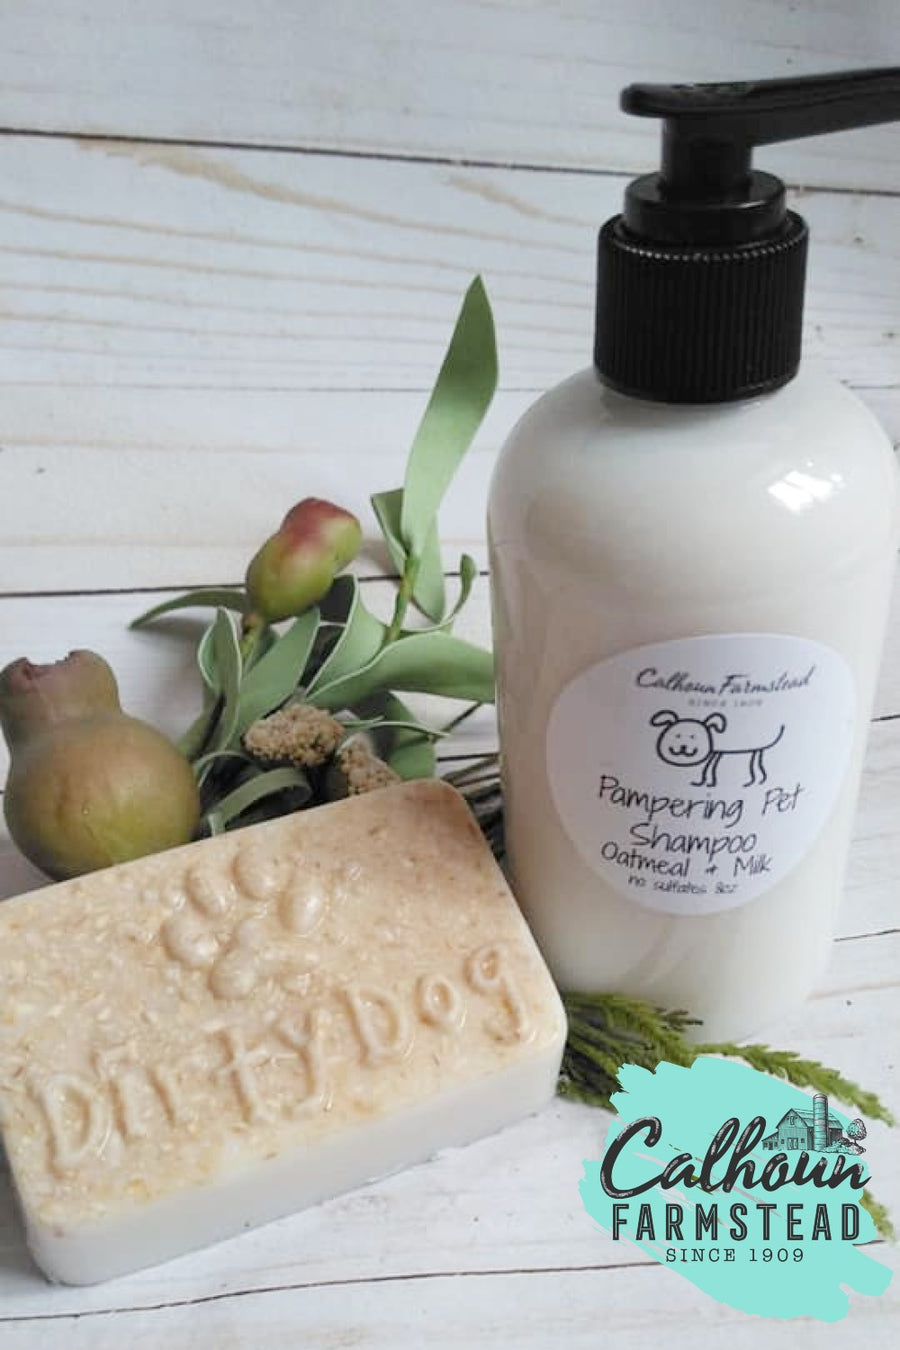 dog soap products made with natural ingredients